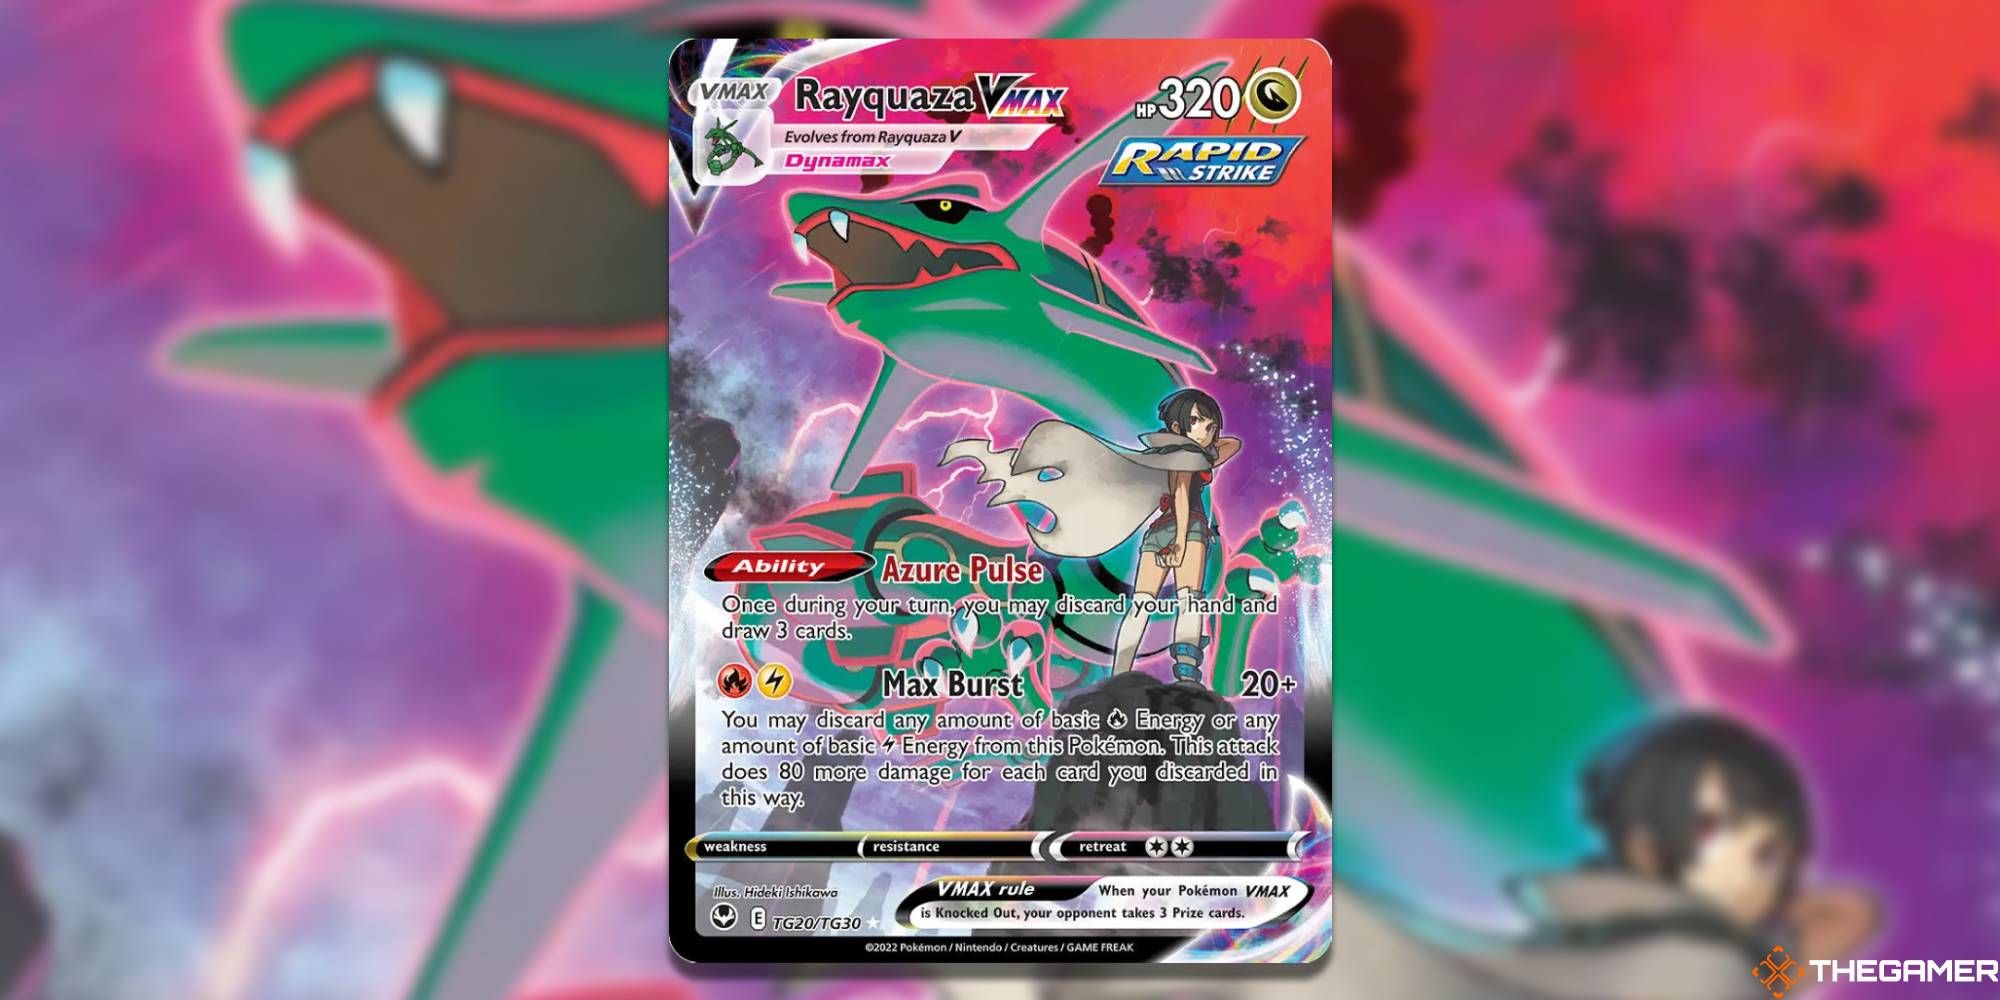 Rayquaza VMAX from Pokemon TCG with blurred background